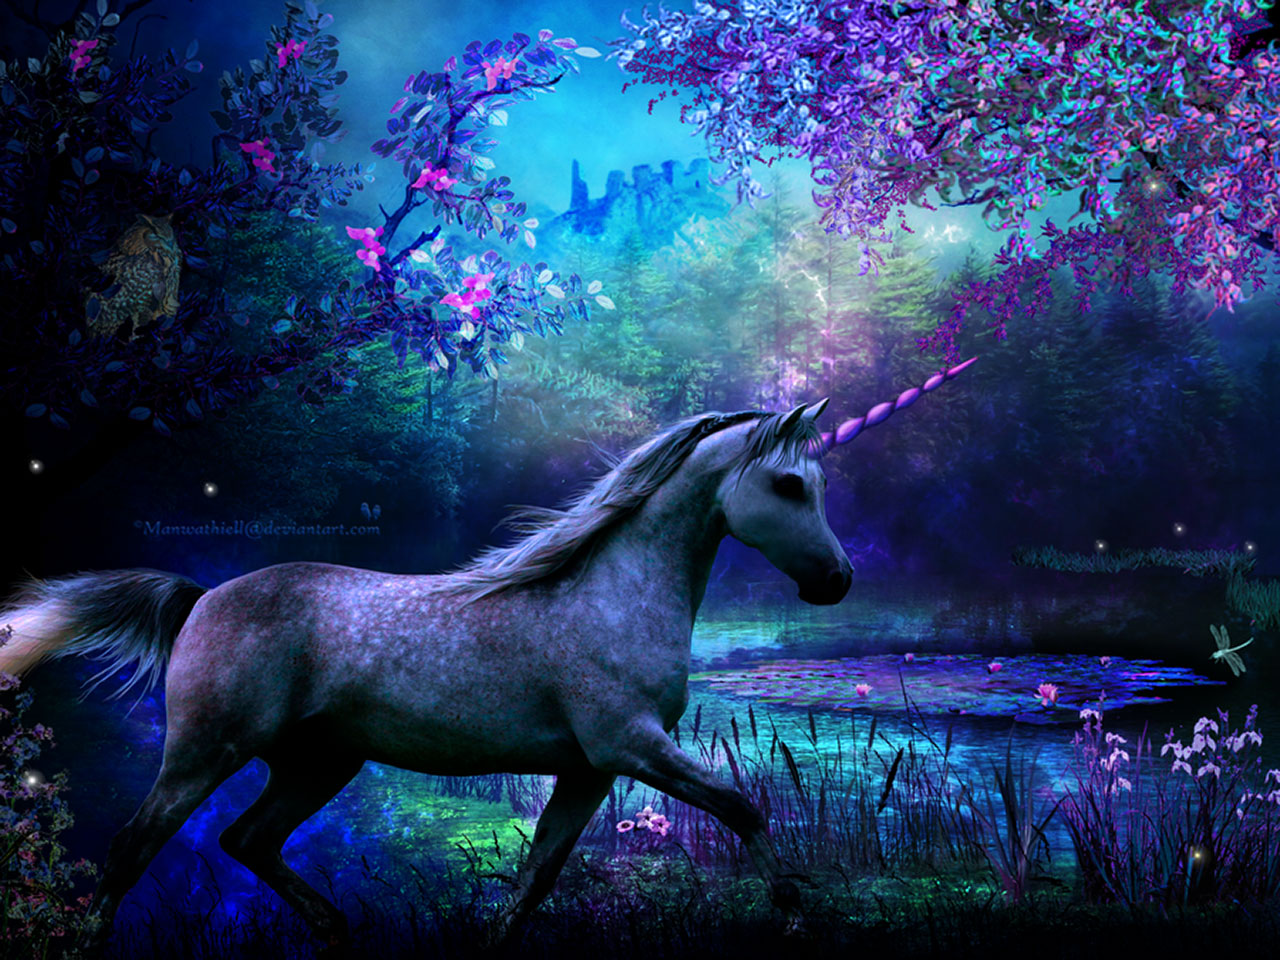 Unicorn Cell Phone Wallpaper Images Free Download on Lovepik | 400235383